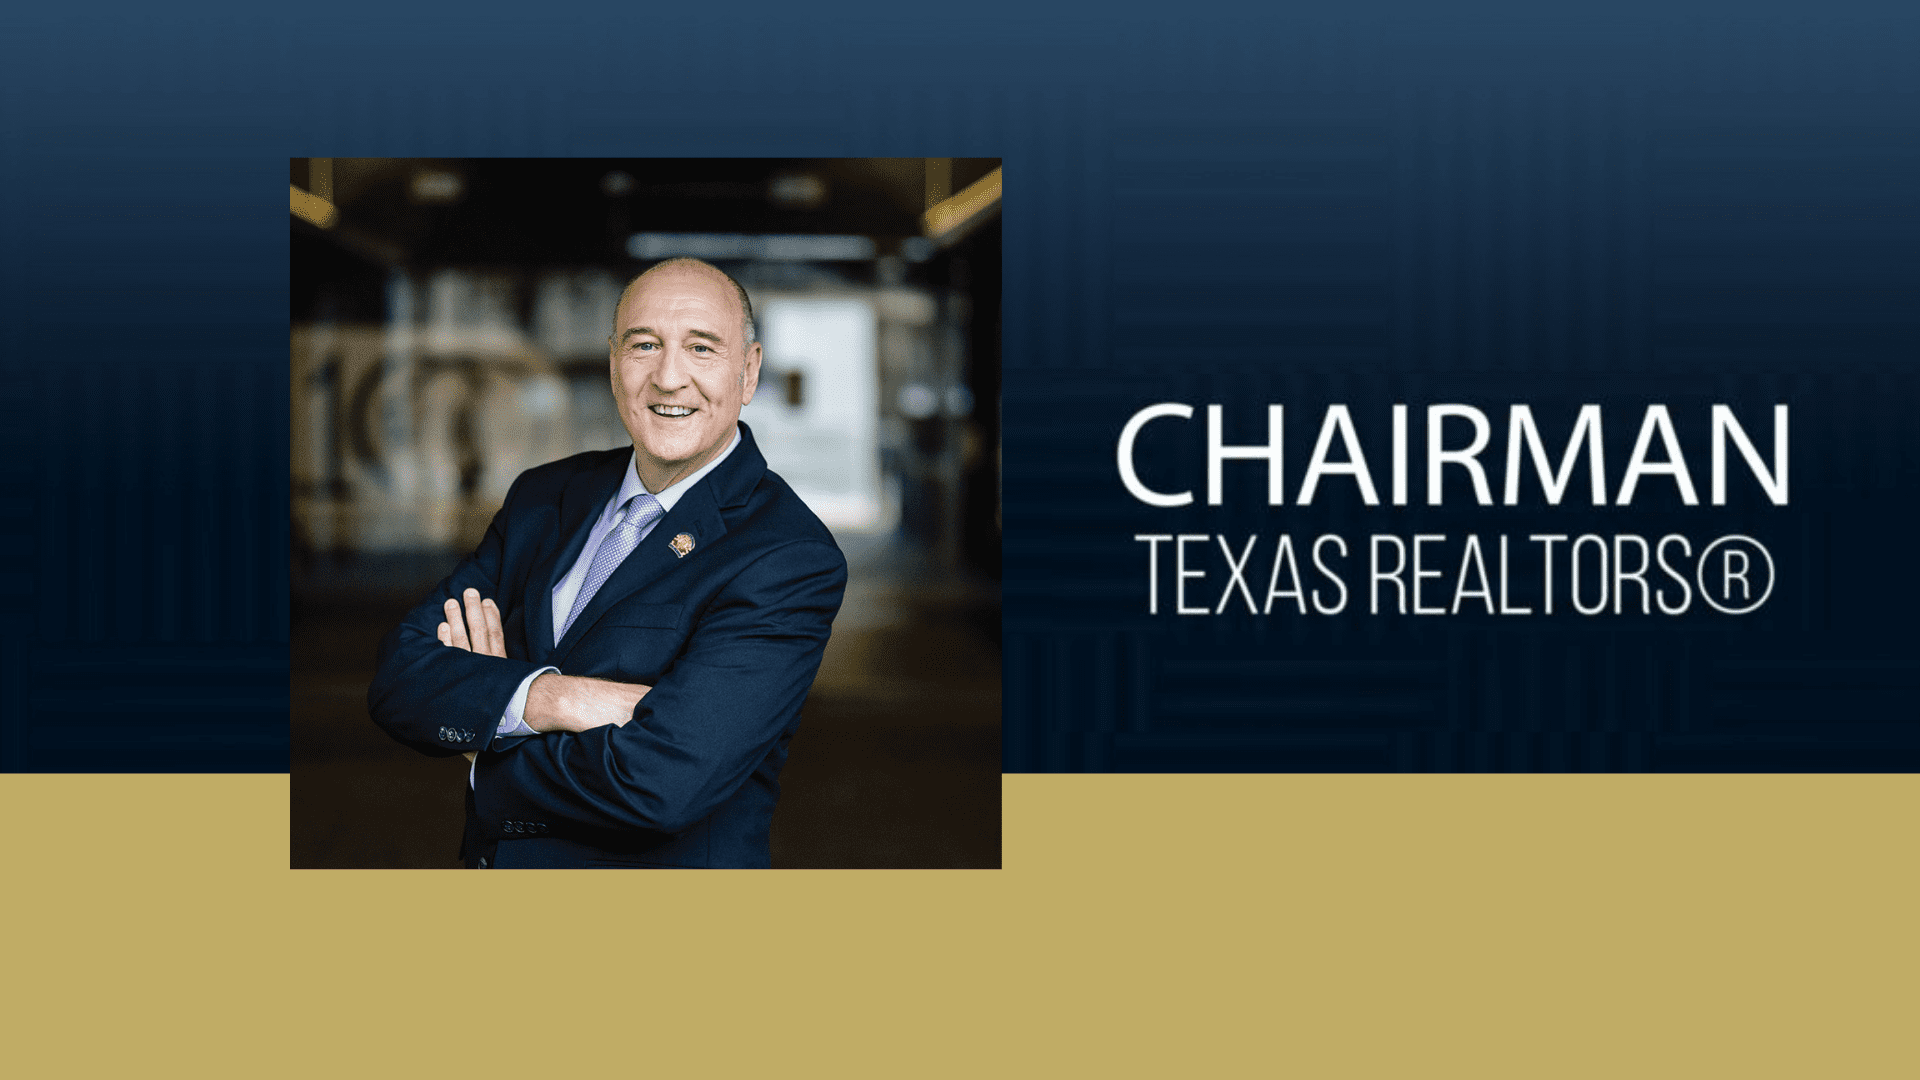 Russell Berry, Chairman of Texas REALTORS®, past MetroTex President and all around industry mover and shaker, joins us for a wide ranging conversation about trends in the Texas housing market, Texas politics and PIDS...oh my!